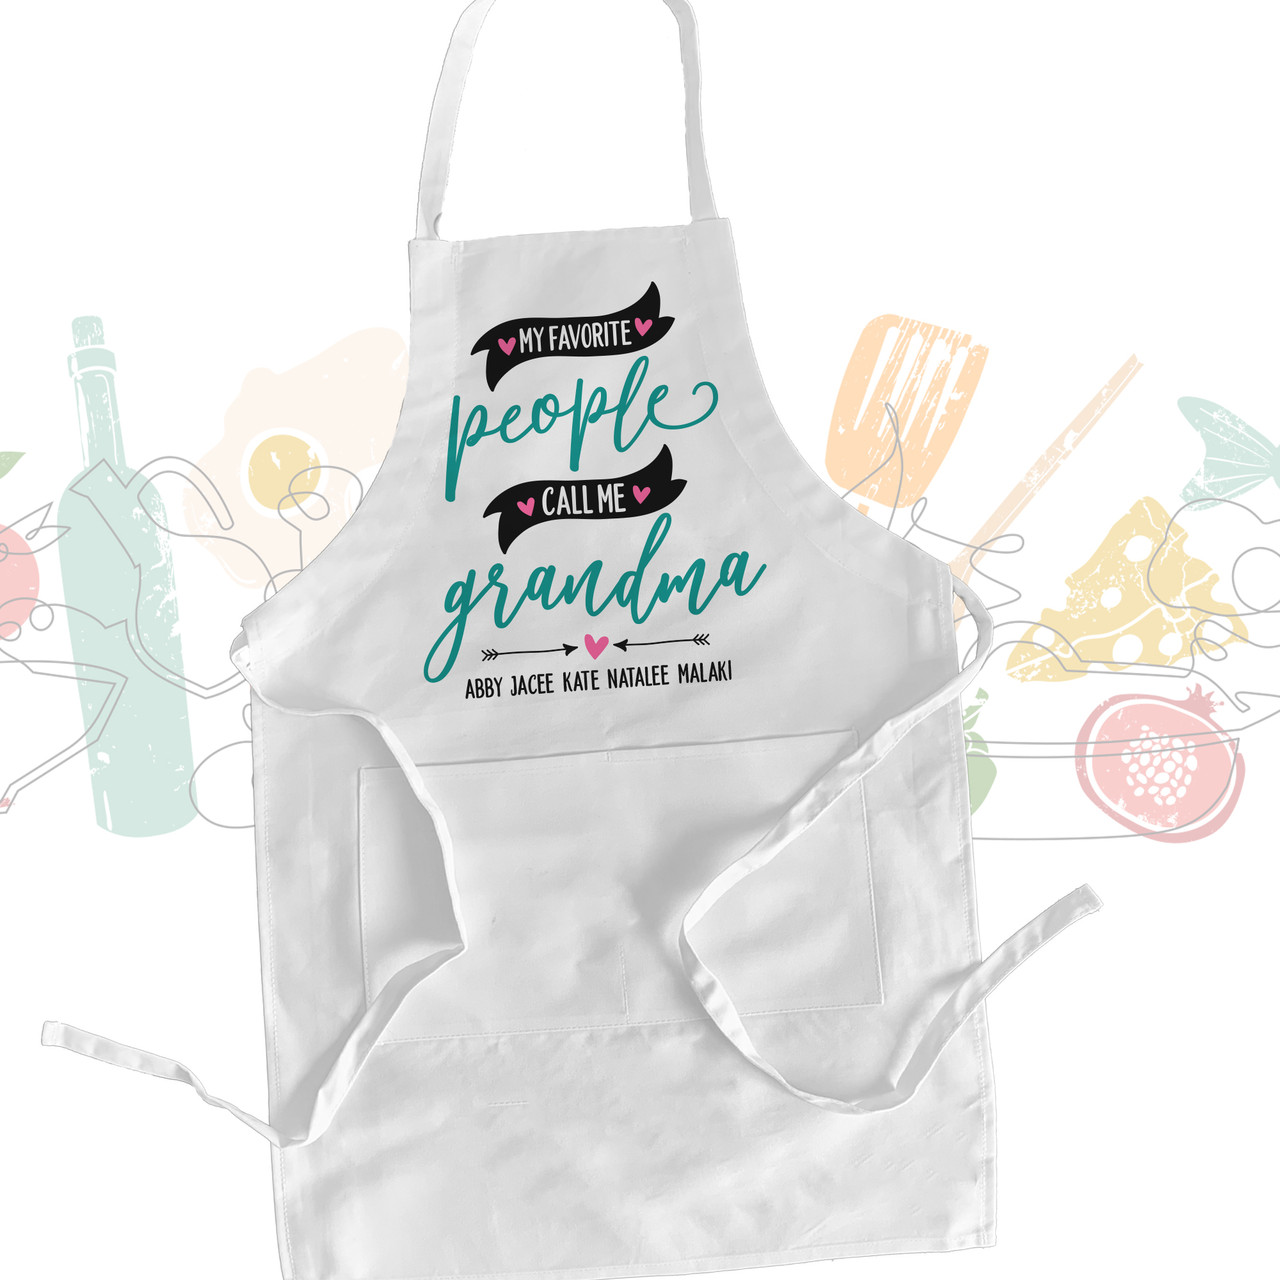 https://cdn11.bigcommerce.com/s-6a772/images/stencil/1280x1280/products/4703/103789/MMGA1-099-Apron__84311.1697735599.jpg?c=2